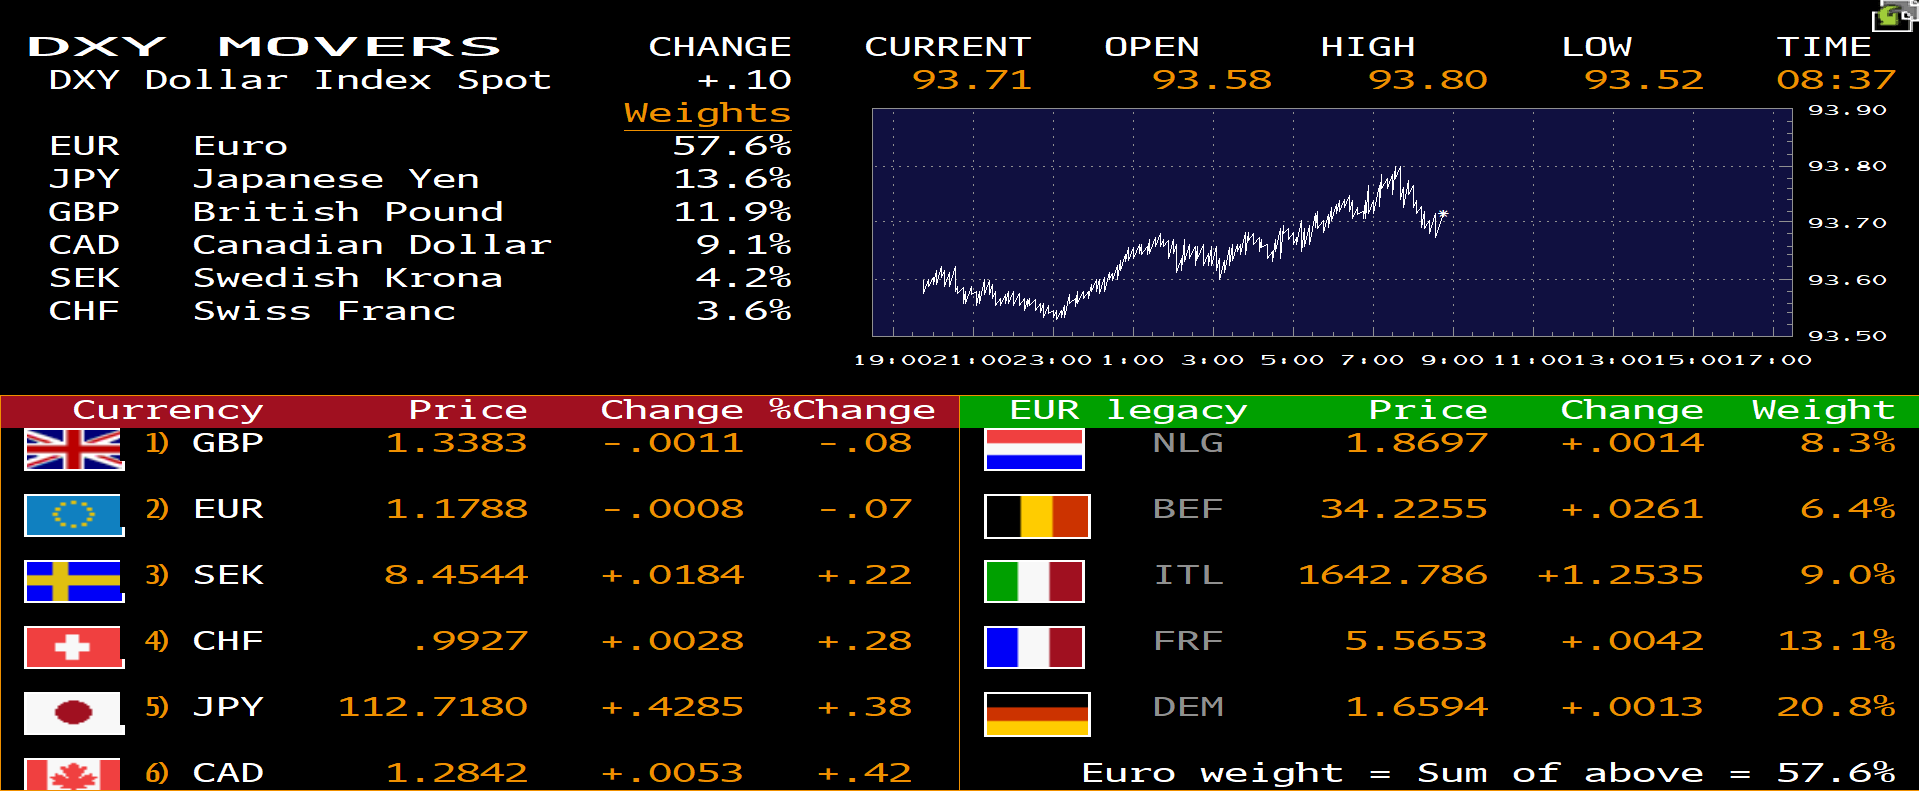 Crb Index Chart Bloomberg